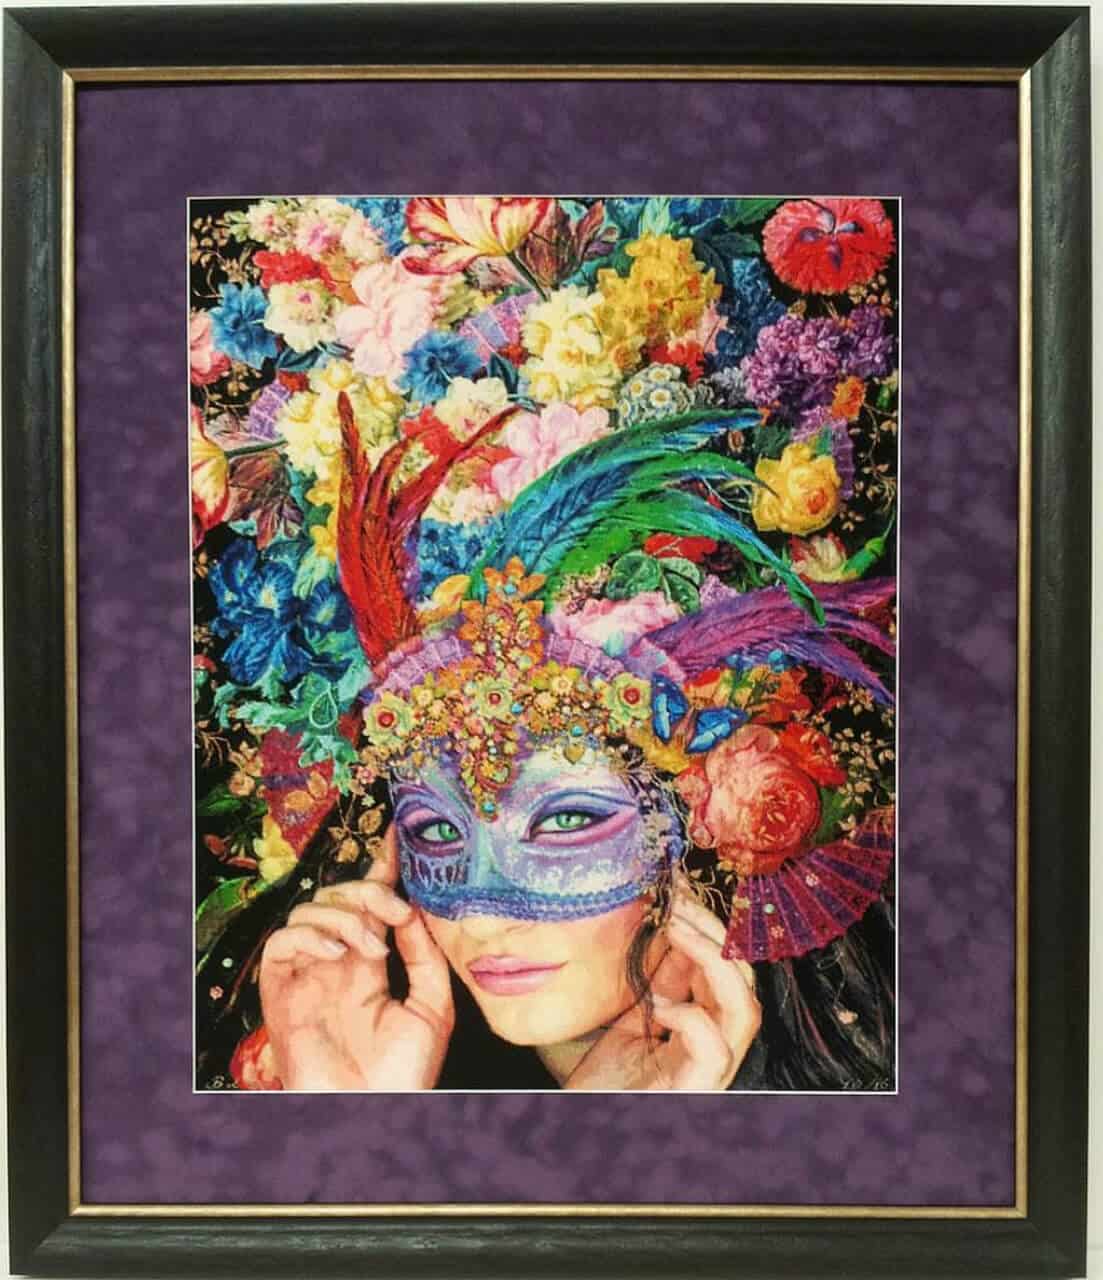 A framed cross-stitch of a woman wearing a colorful mask.